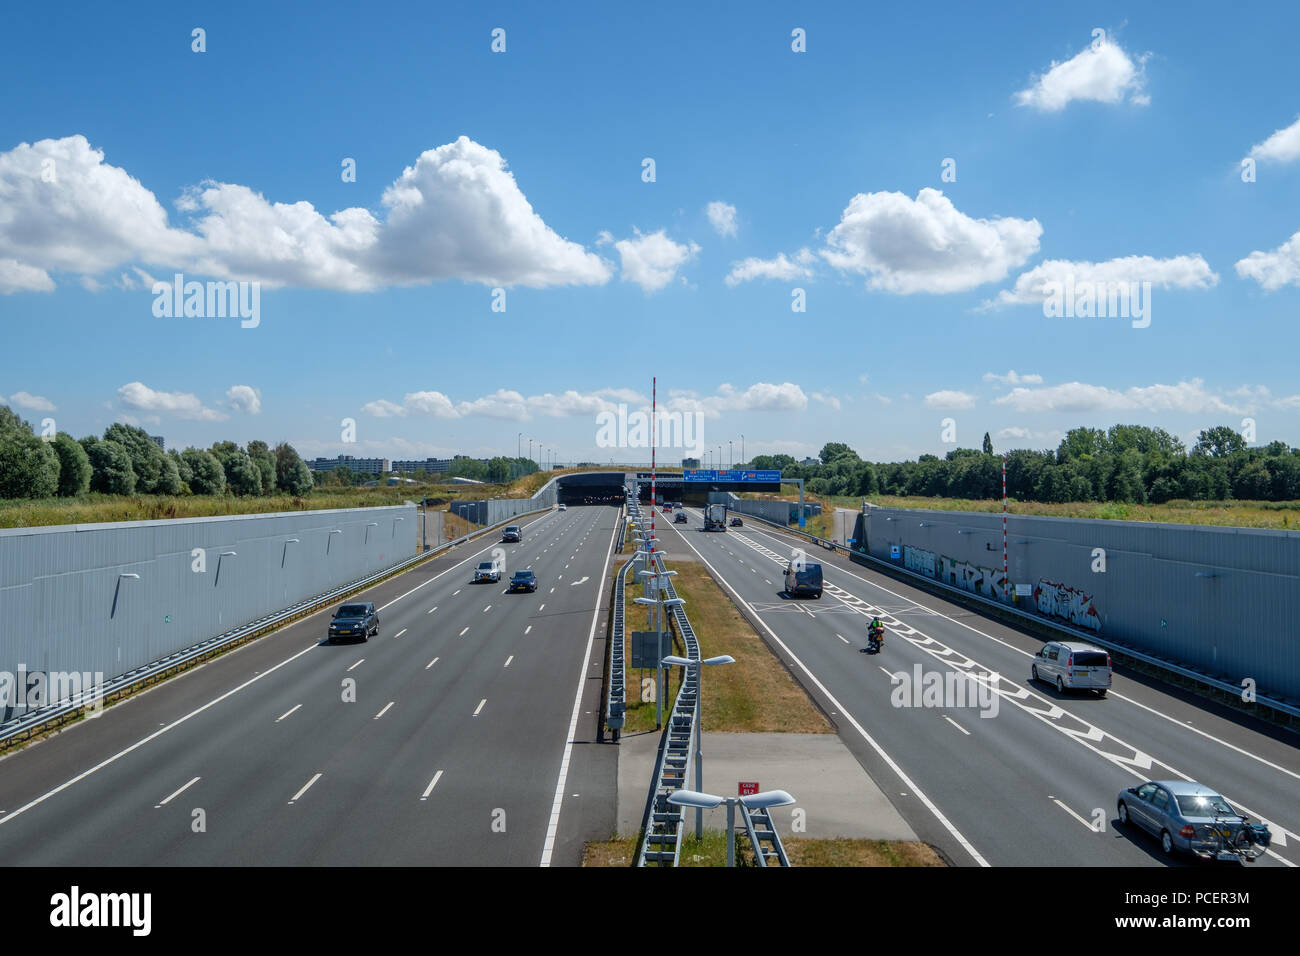 SCHIEDAM, NETHERLANDS - JUL 31, 2018 : Modern deepened Highway A4, leading into a tunnel under the urban area close to Rotterdam Netherlands. The deep Stock Photo